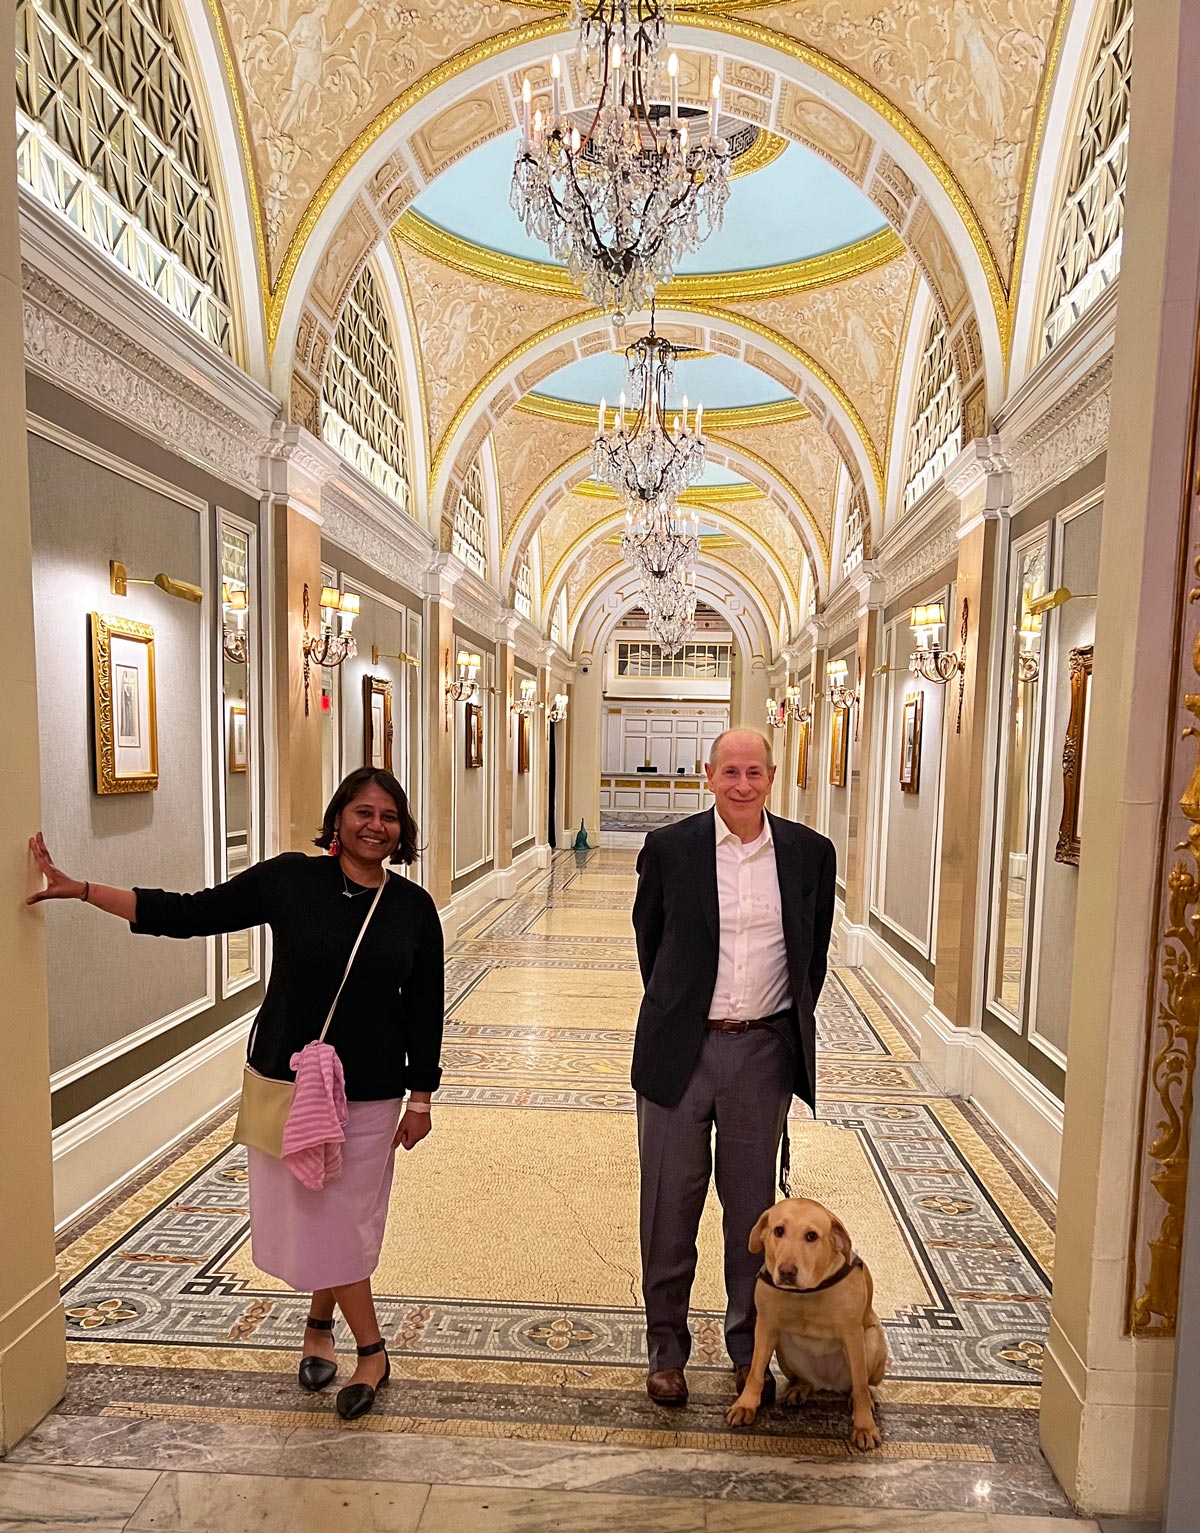 Lakshmee Lachhman-Persad and Peter Slatin with his guide dog Inga standing in the lobby of the historic Fairmont hotel in a long, arched, opulent hallway featuring grand chandeliers, artwork on the walls and a mosaic floor.